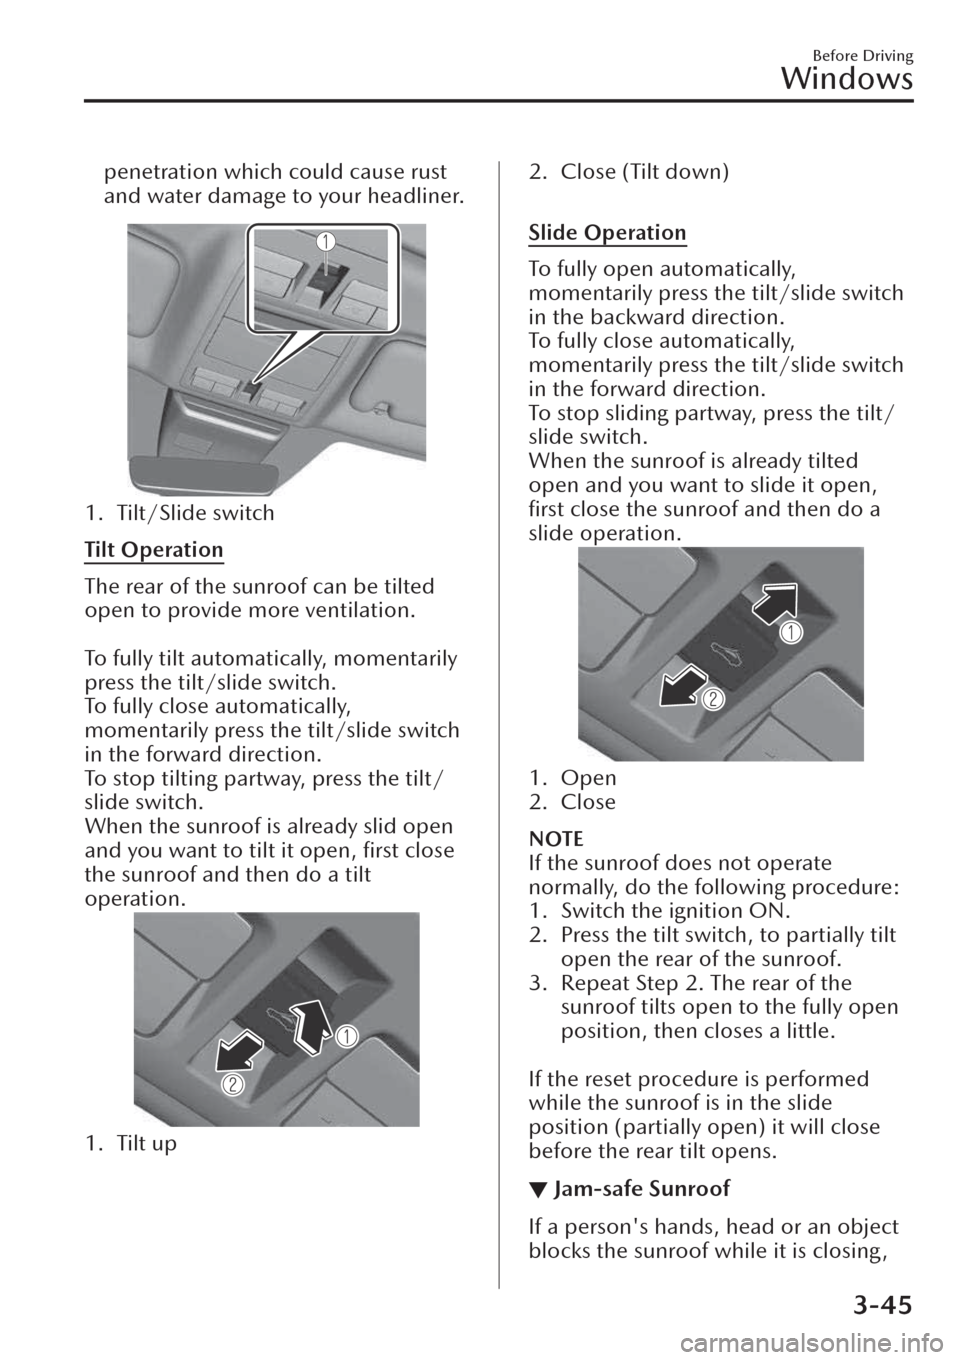 MAZDA MODEL CX-30 2019  Owners Manual (in English) penetration which could cause rust
and water damage to your headliner.
1. Tilt/Slide switch
Tilt Operation
The rear of the sunroof can be tilted
open to provide more ventilation.
 
To fully tilt autom